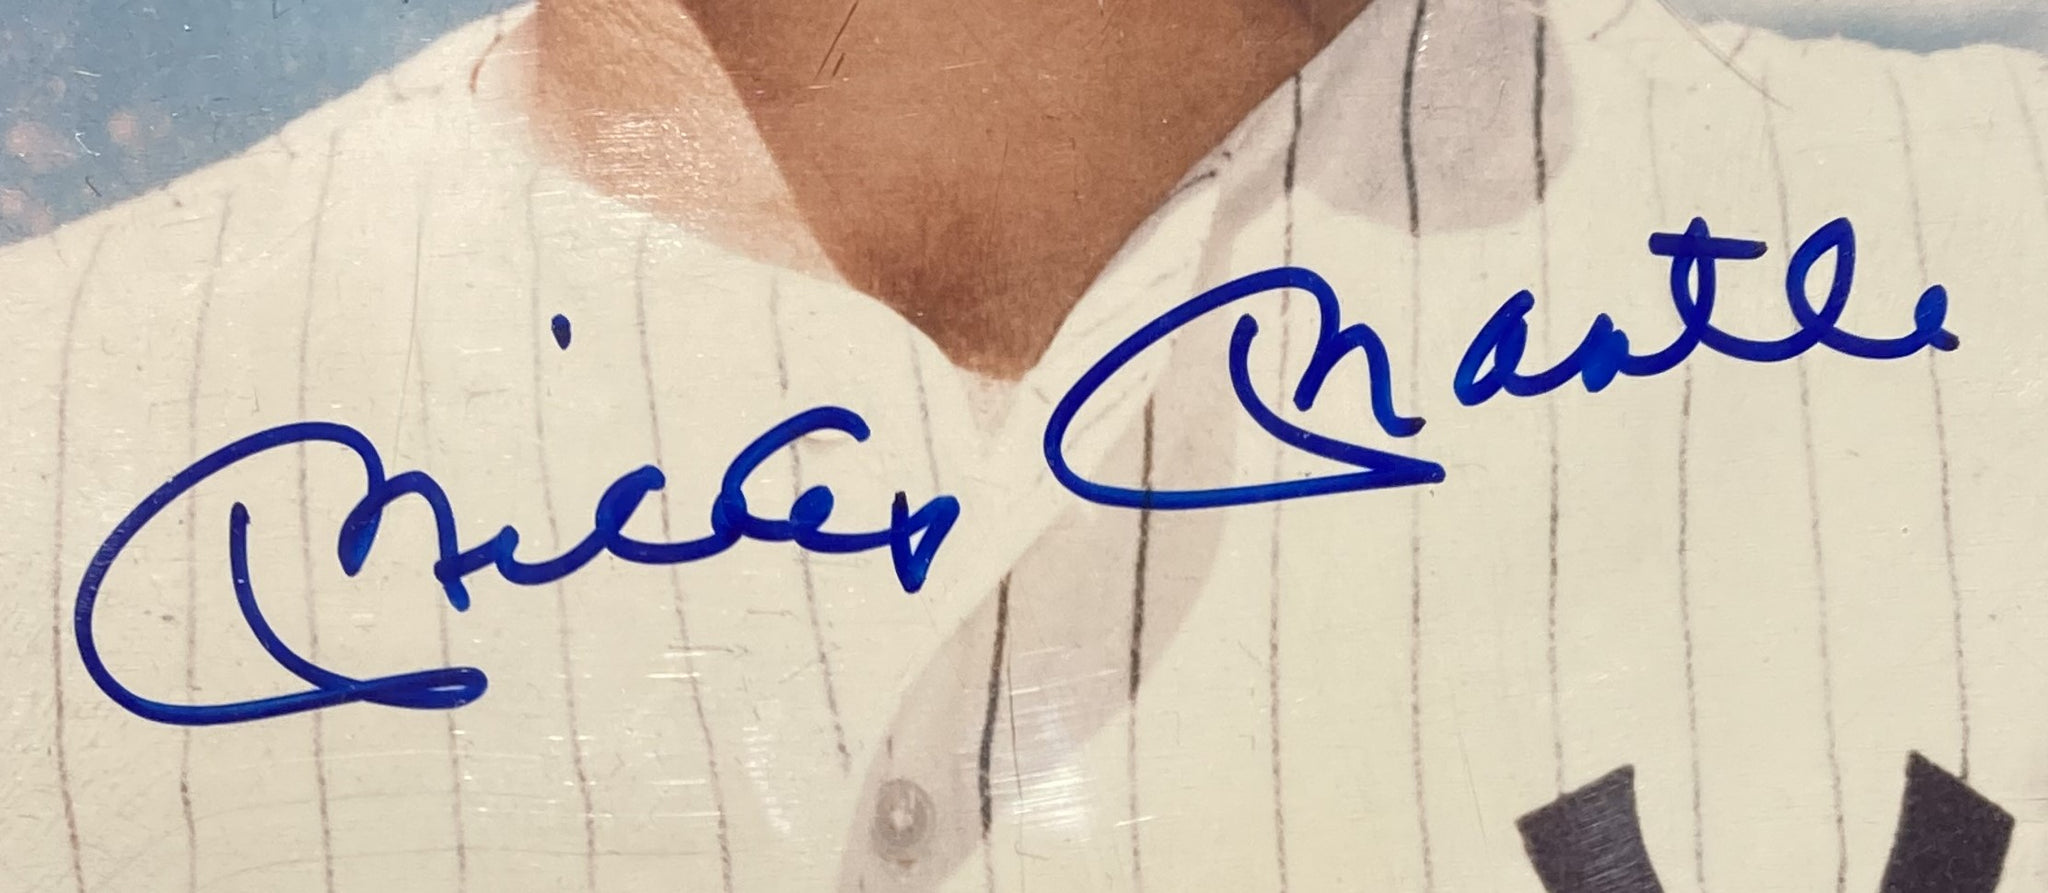 Mickey Mantle Signed Slabbed 8x10 New York Yankees Photo BAS Autograph –  Sports Integrity